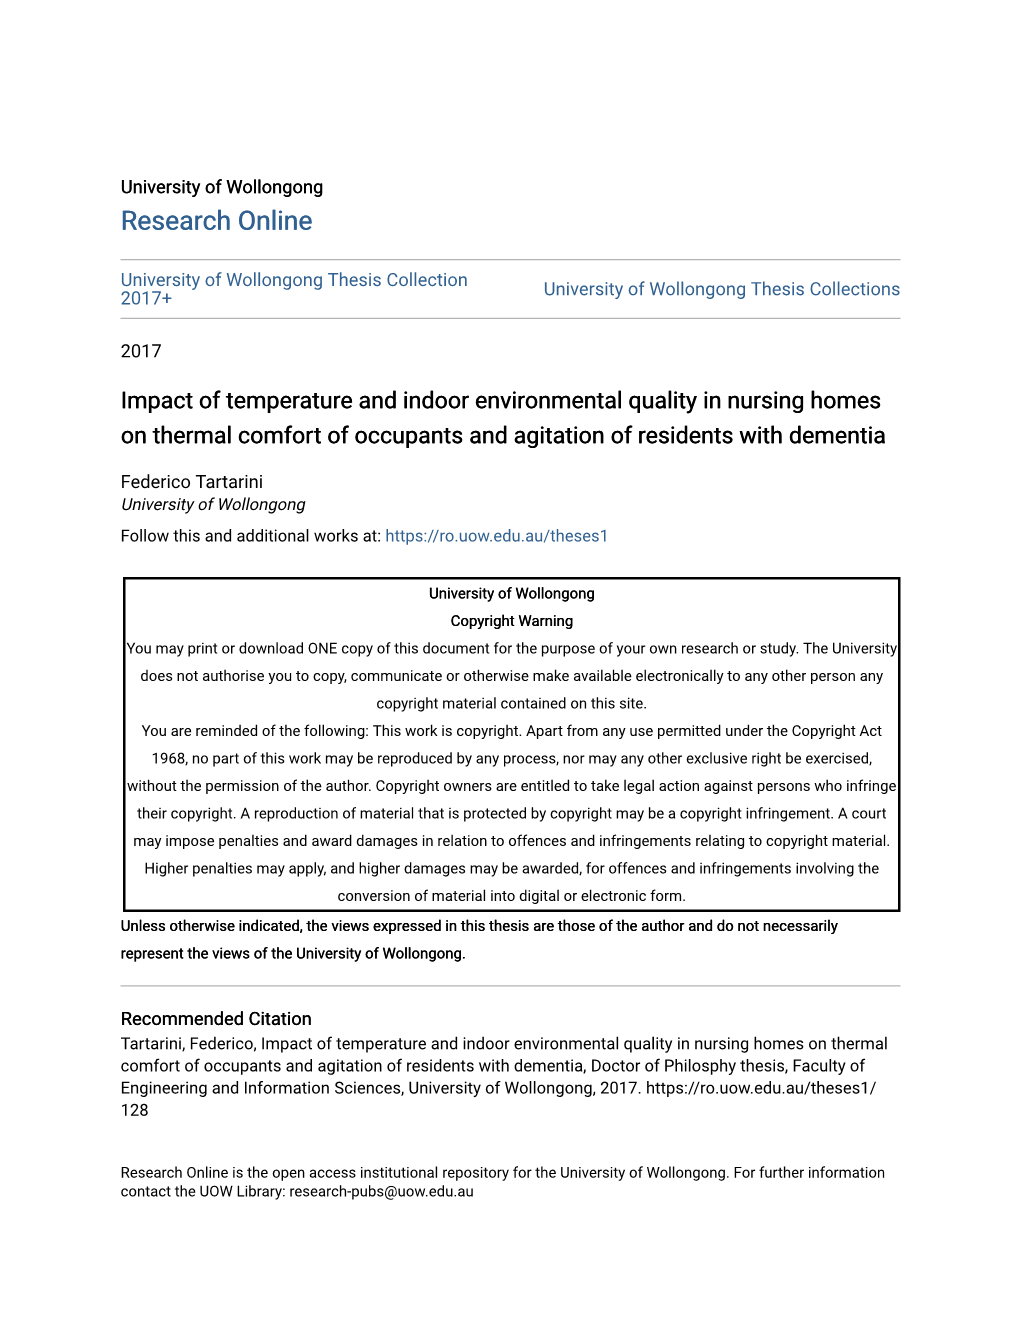 Impact of Temperature and Indoor Environmental Quality in Nursing Homes on Thermal Comfort of Occupants and Agitation of Residents with Dementia